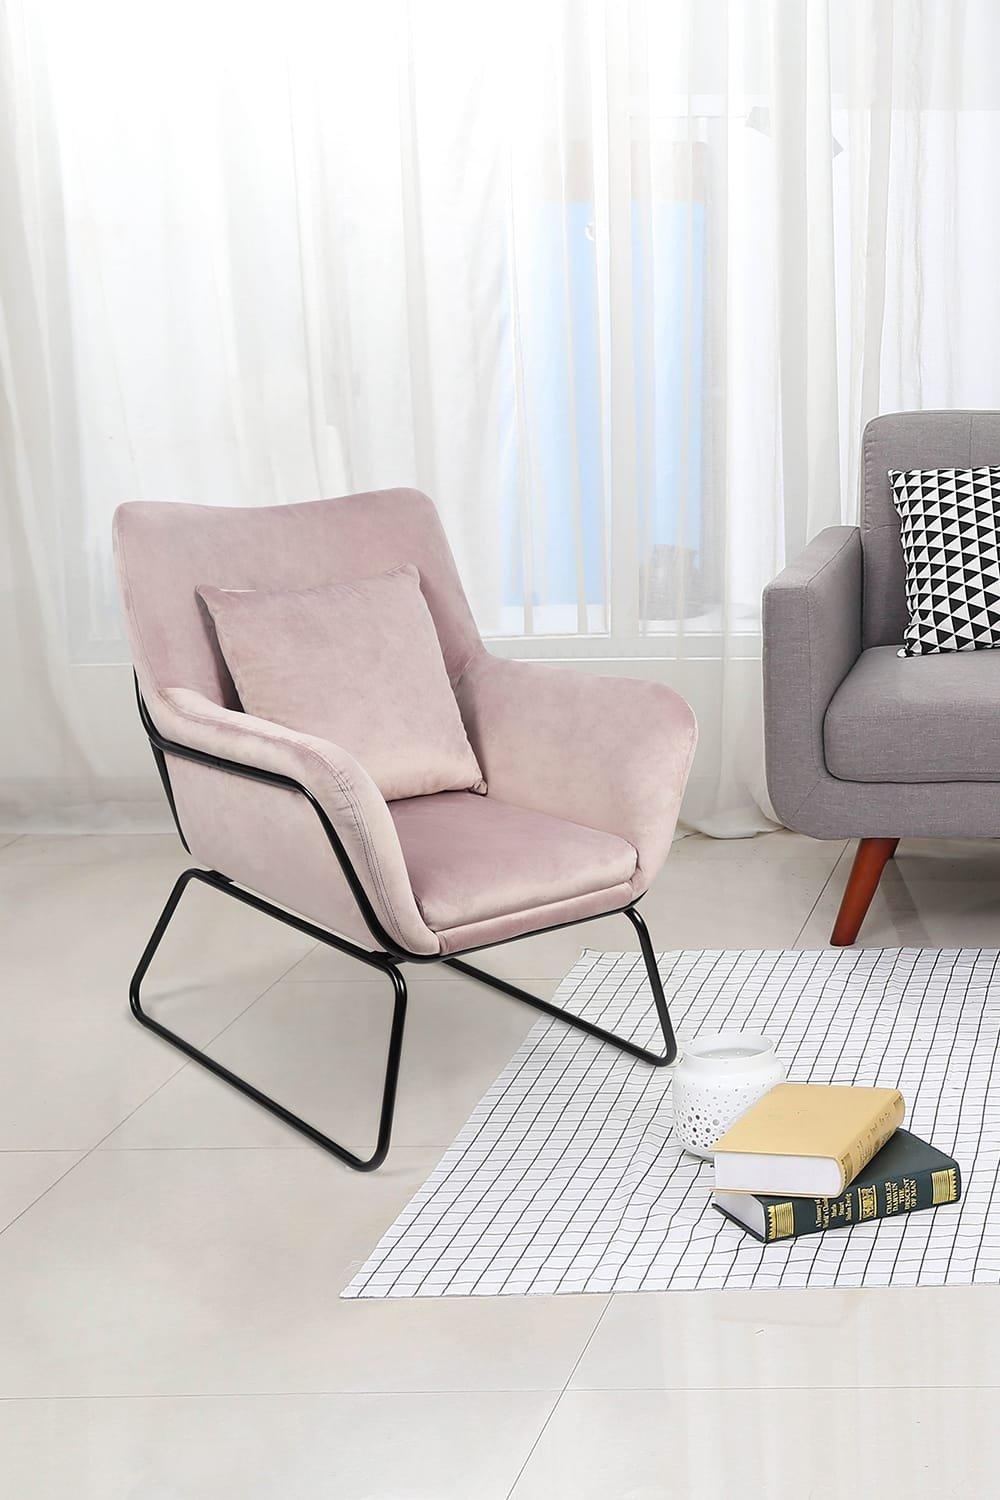 mutoni Fauteuil relax velours velours rose  